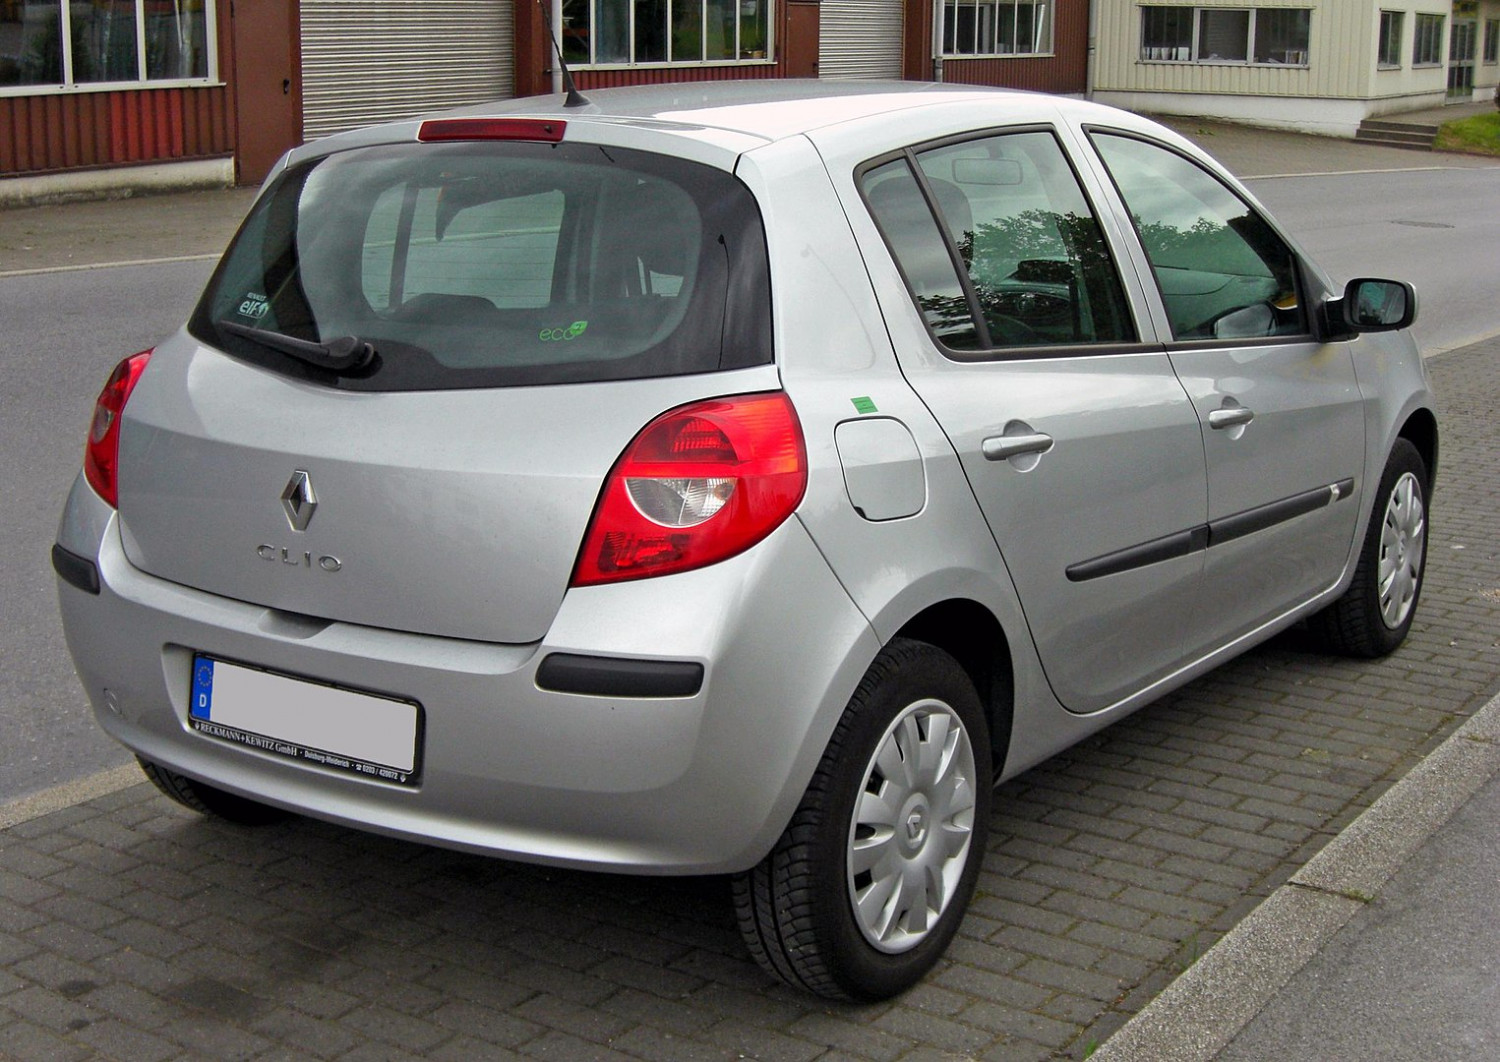 Example of a Clio 3